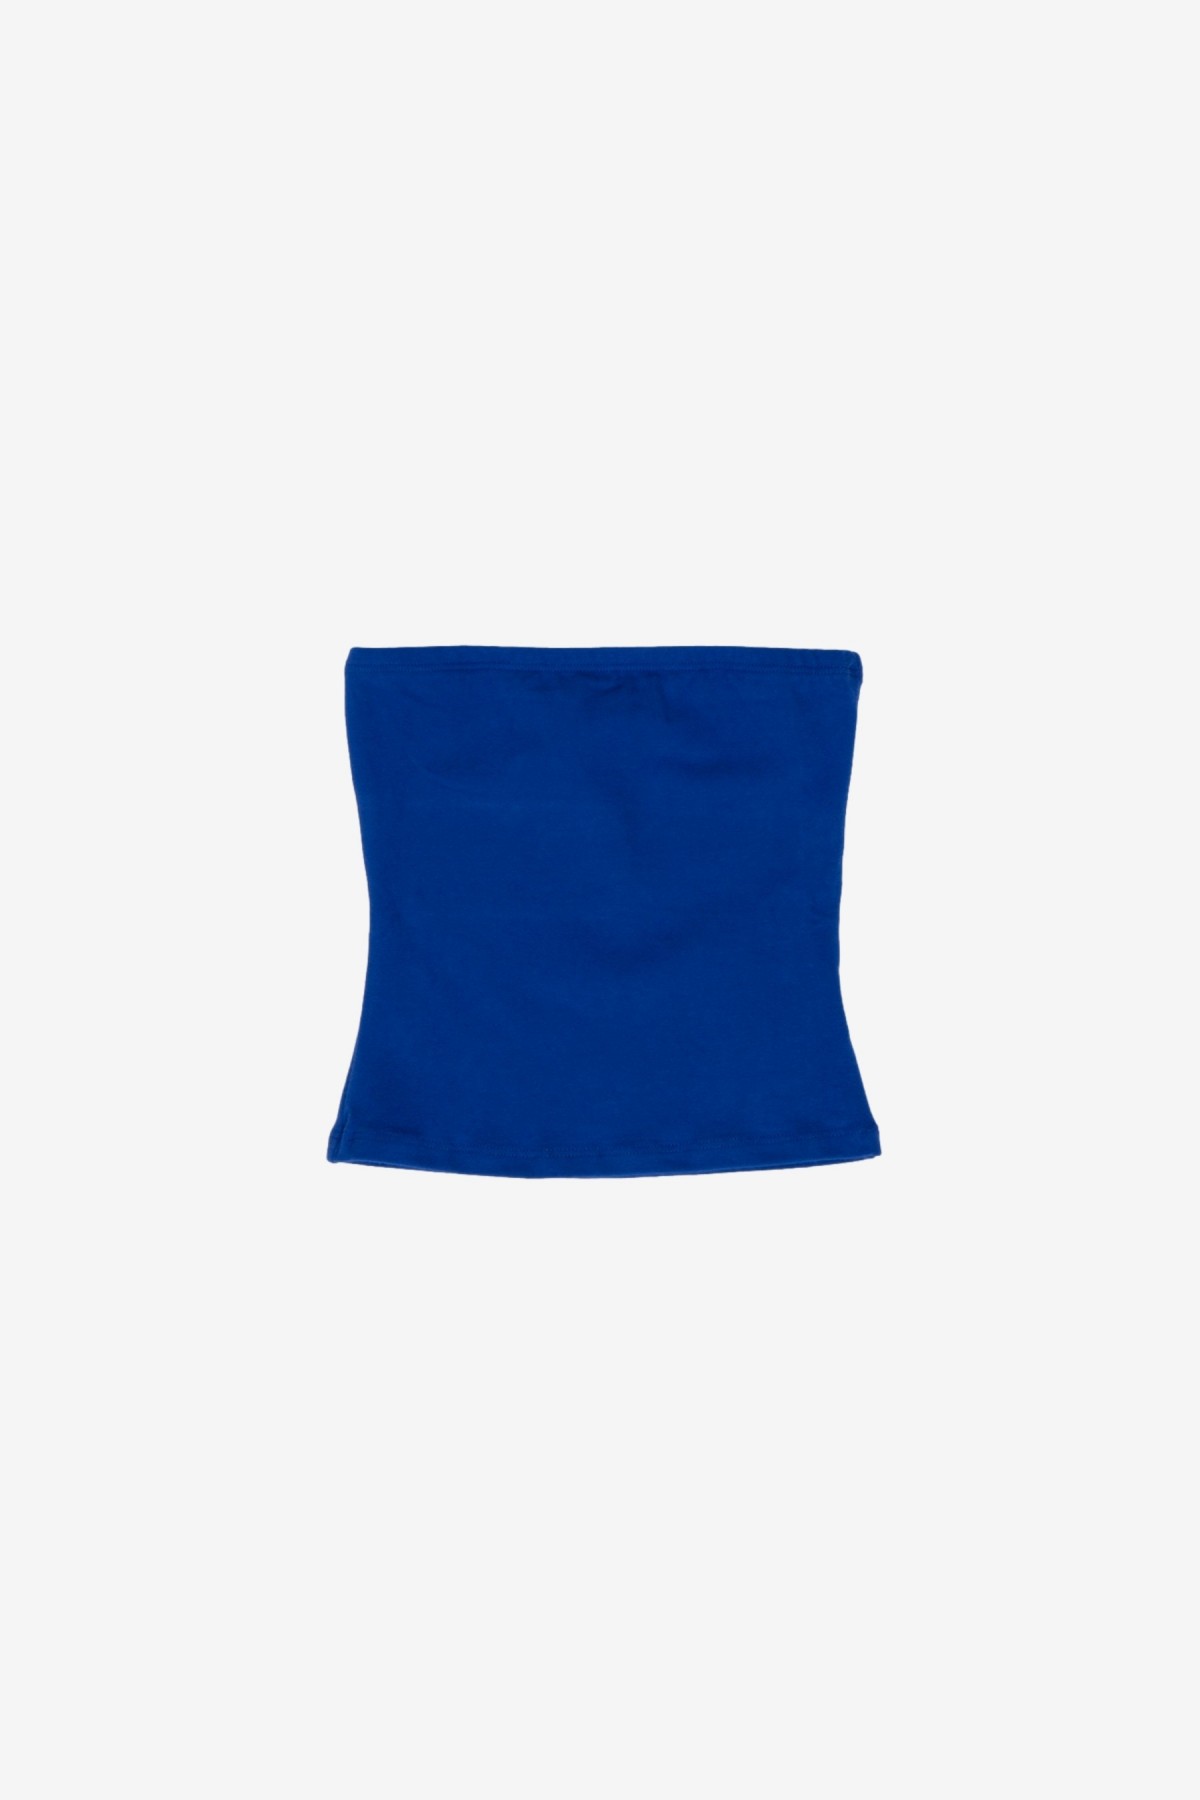 Gil Rodriguez The Tube Convertible Top in Lapis